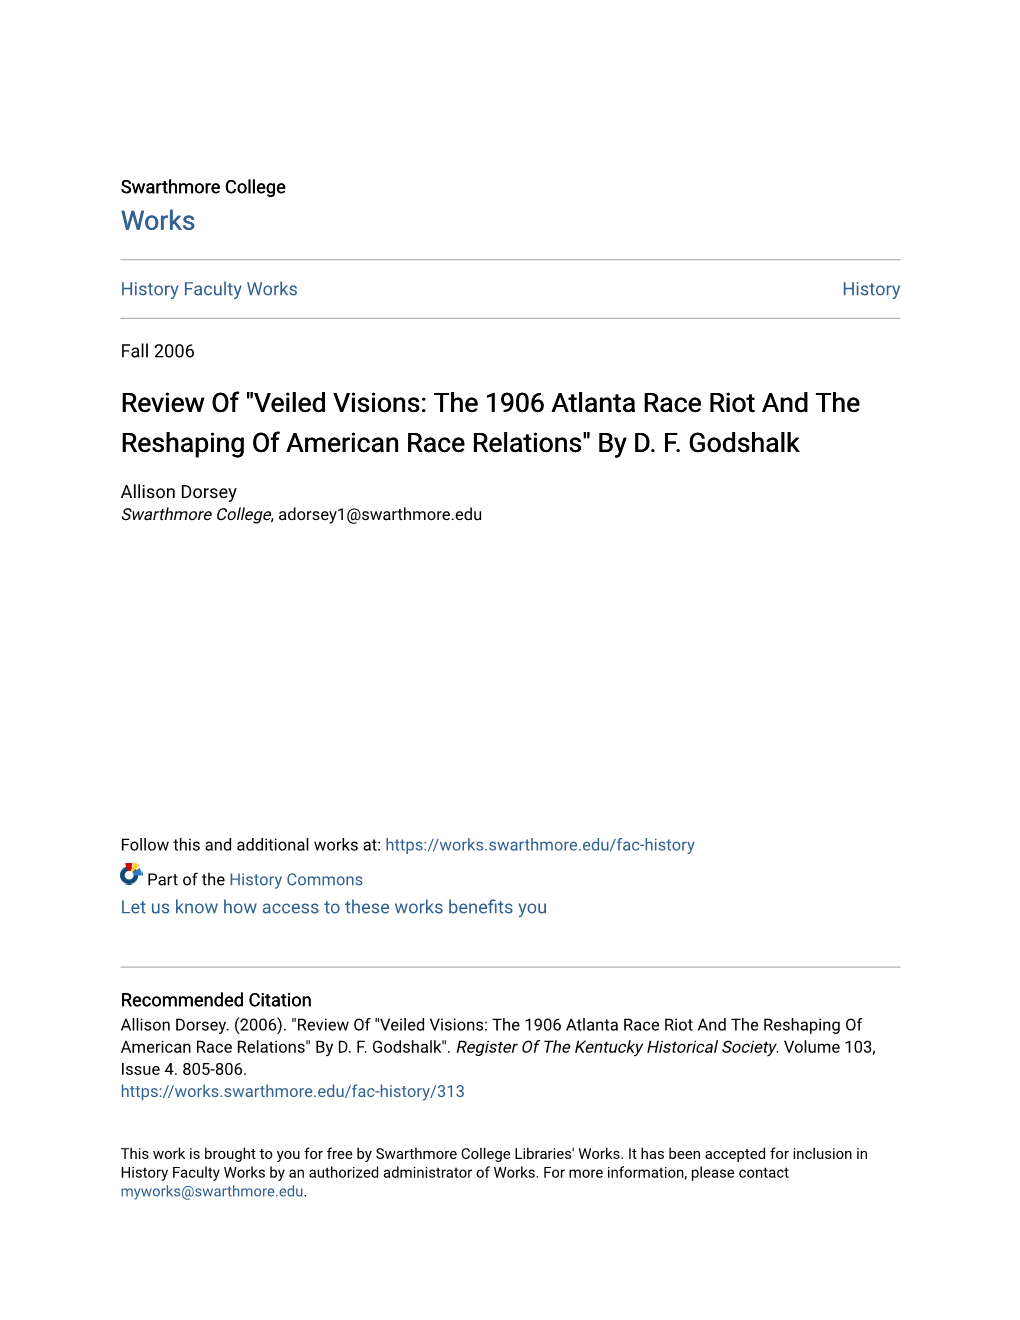 Veiled Visions: the 1906 Atlanta Race Riot and the Reshaping of American Race Relations" by D